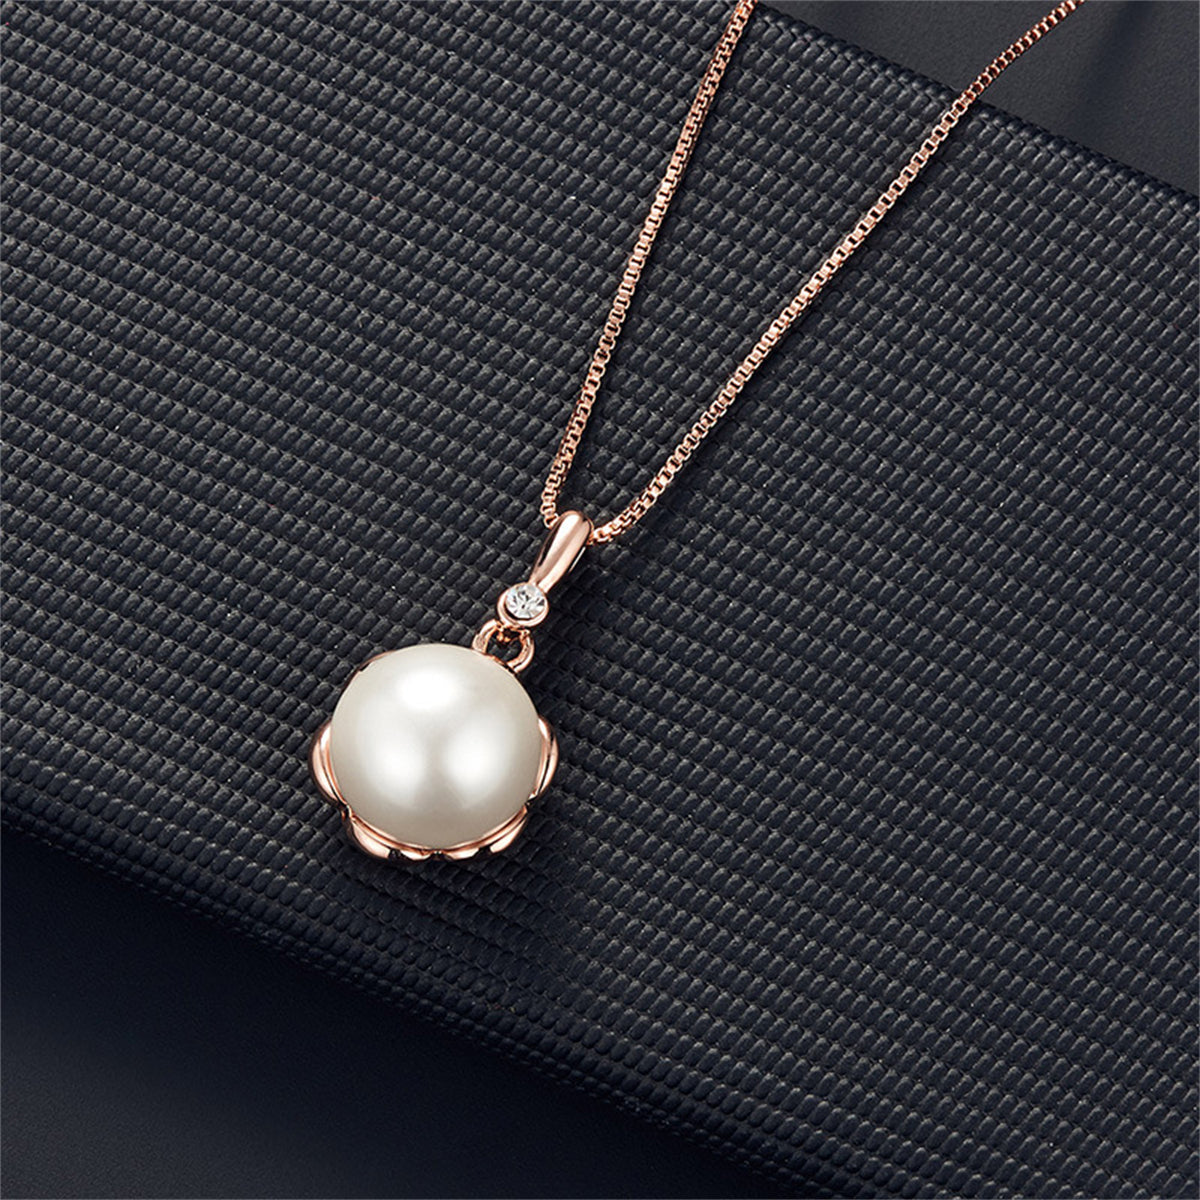 Pearl & 18K Rose Gold-Plated Blossom Pendant Necklace Set